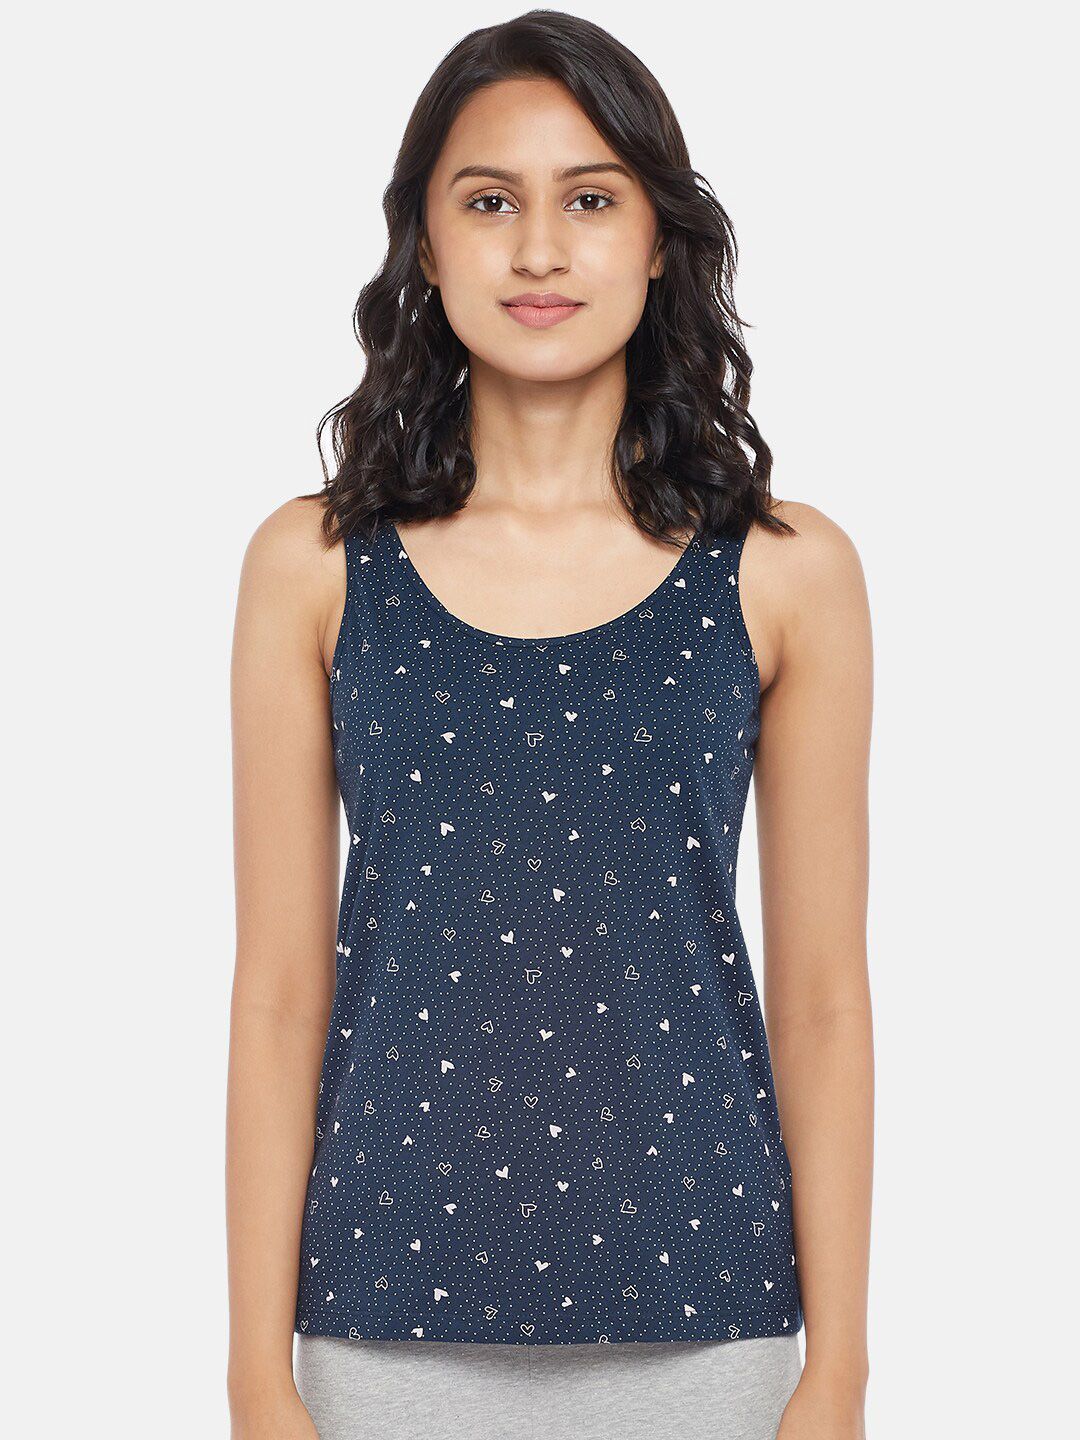 Dreamz by Pantaloons Navy Blue Tank Lounge tshirt Price in India